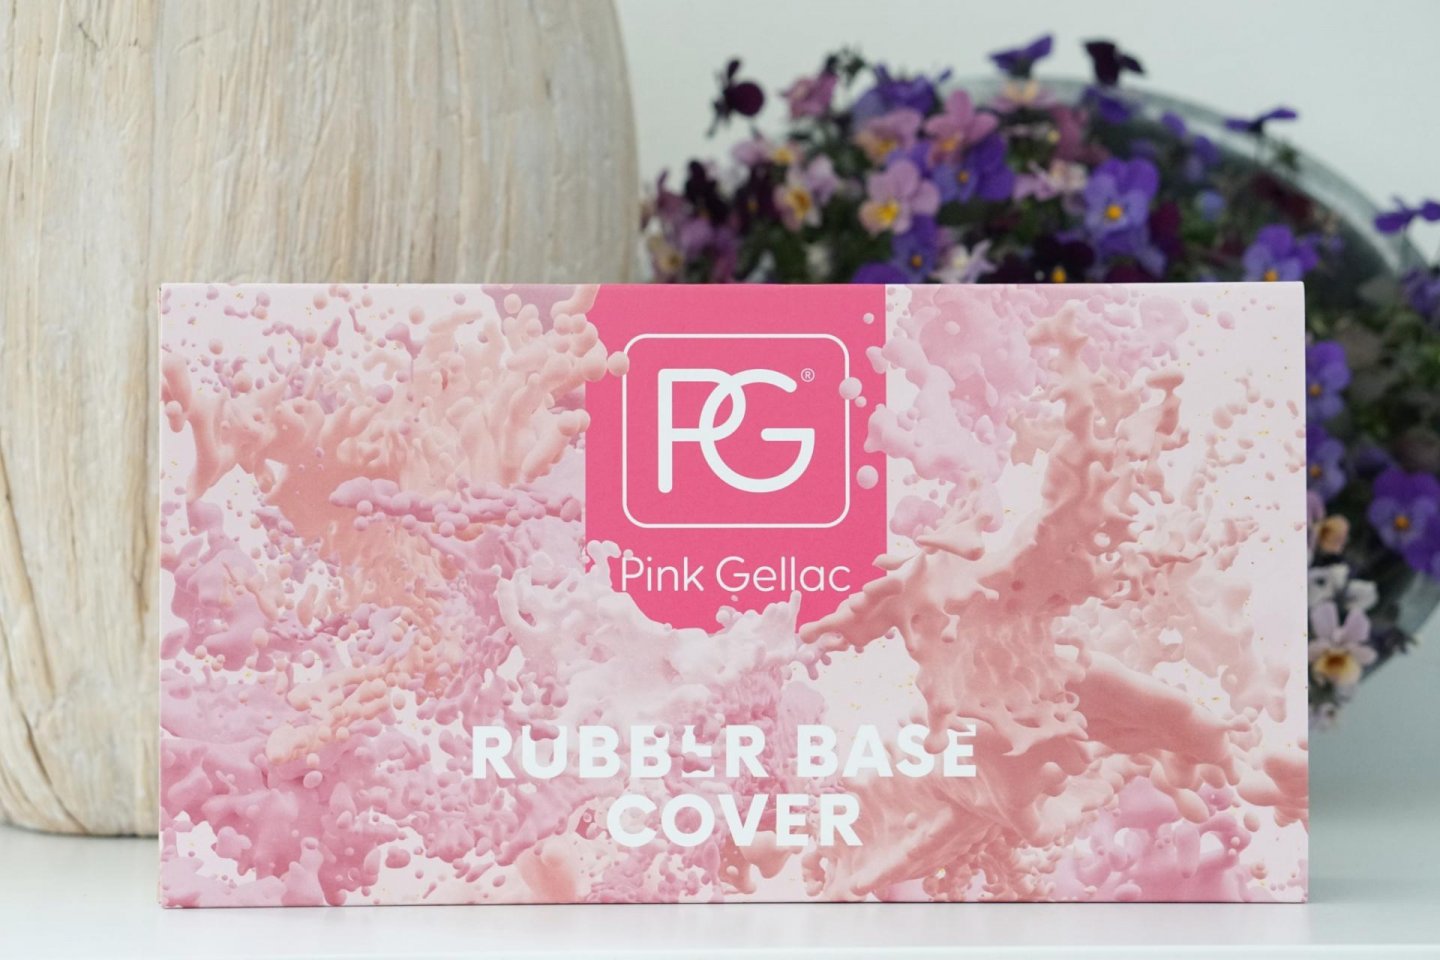 review Pink Gellac Rubber Base Cover